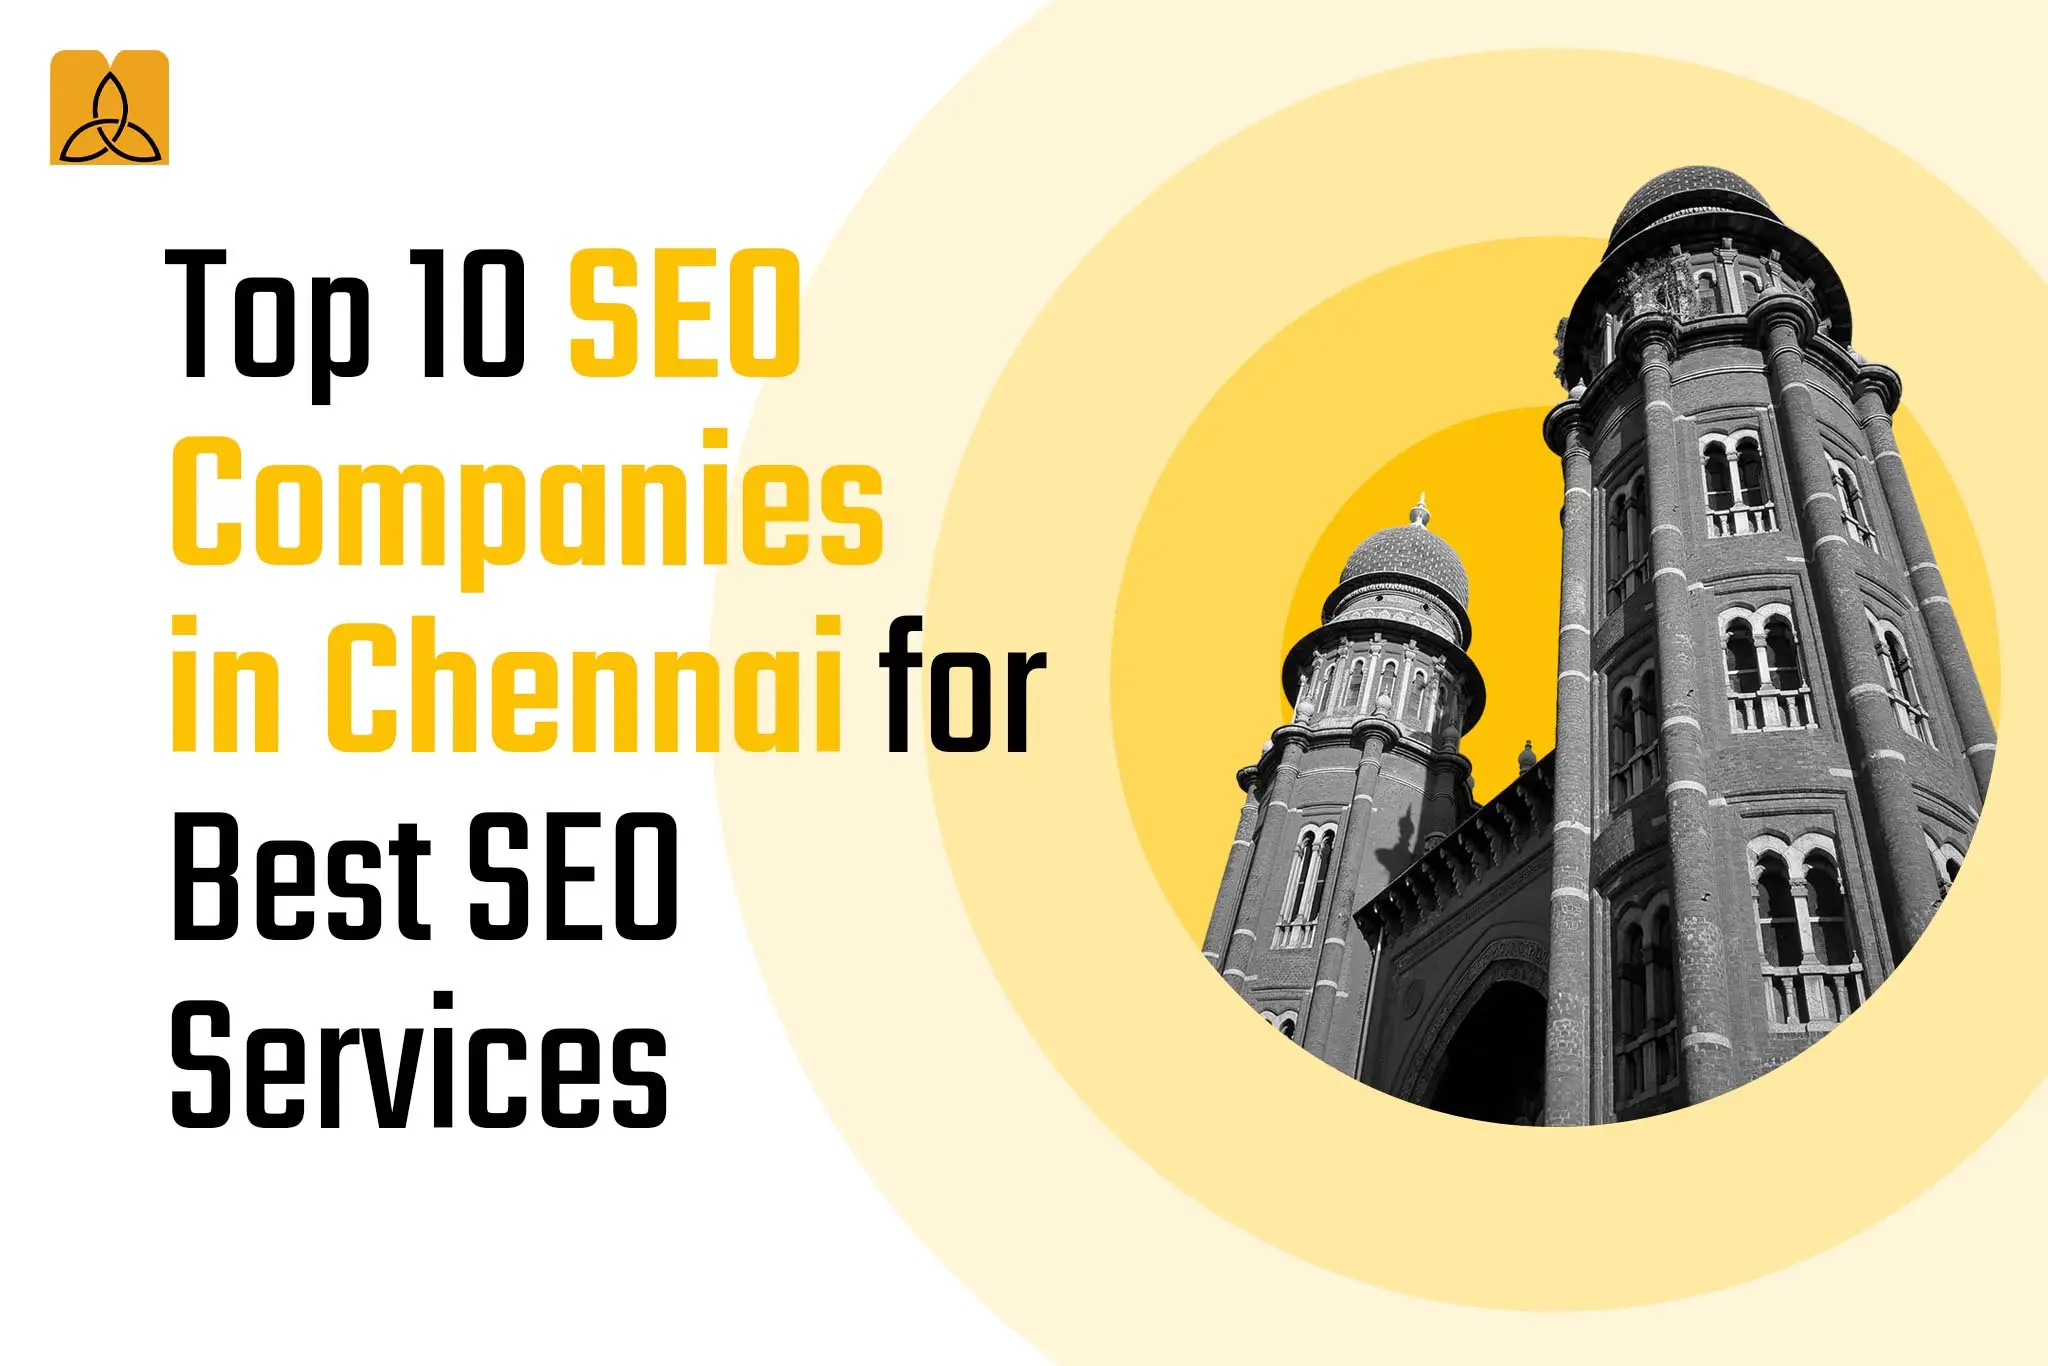 Top 10 SEO Companies in Chennai for Best SEO Services